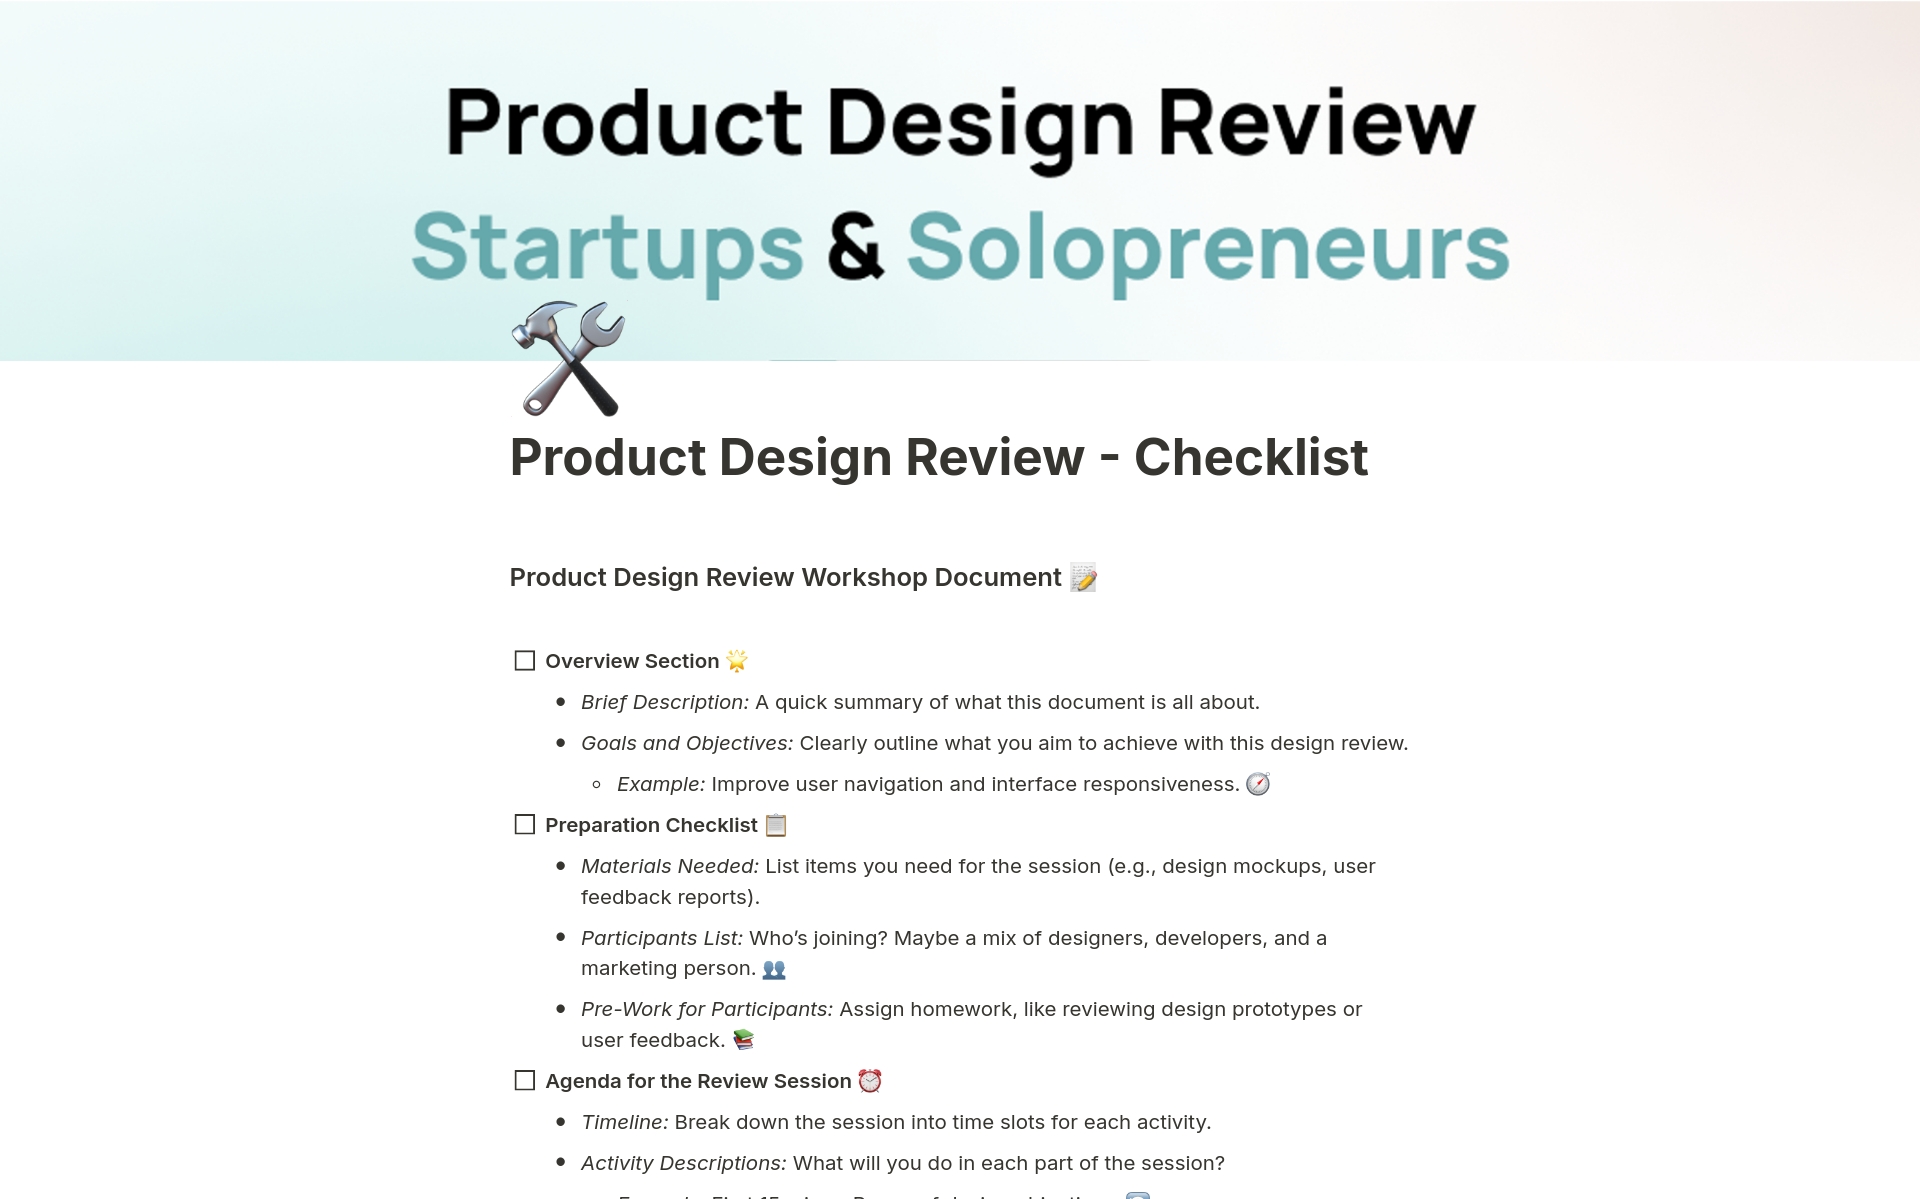 Boost your product's appeal with 80/20 Design's ✅ Product Design Review. Tailored for solopreneurs and startups, it offers key design insights and tips 🖌️.
Discover more at www.8020d.com.